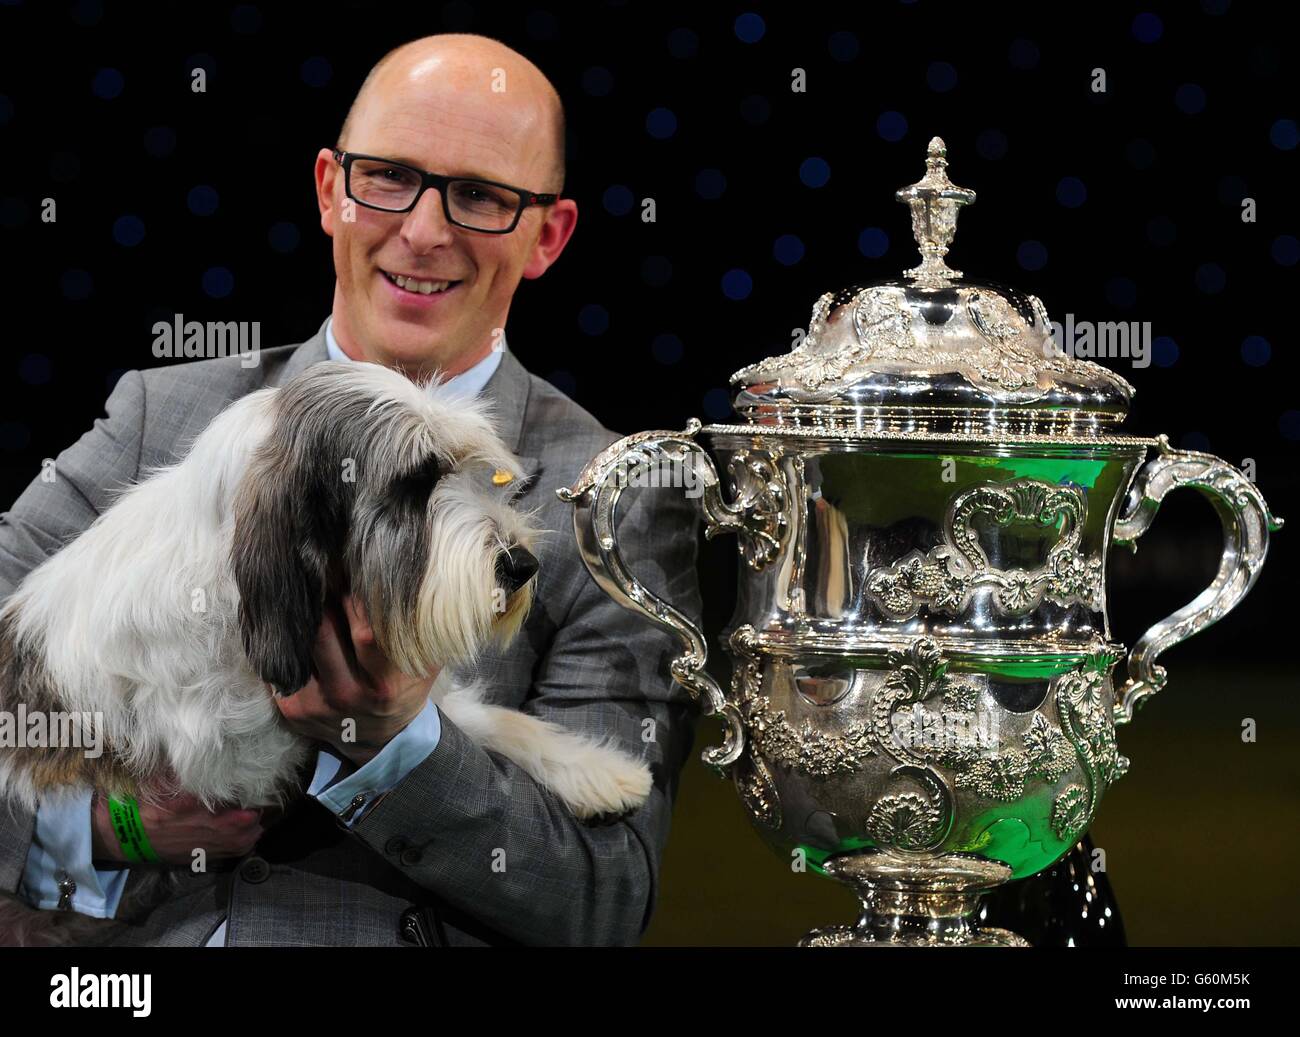 A Petit Basset Griffon Vendeen named Jilly, with owner Gavin Robertson from Wallingford, Oxfordshire, after winning Best in Show at Crufts 2013, NEC, Birmingham. Stock Photo